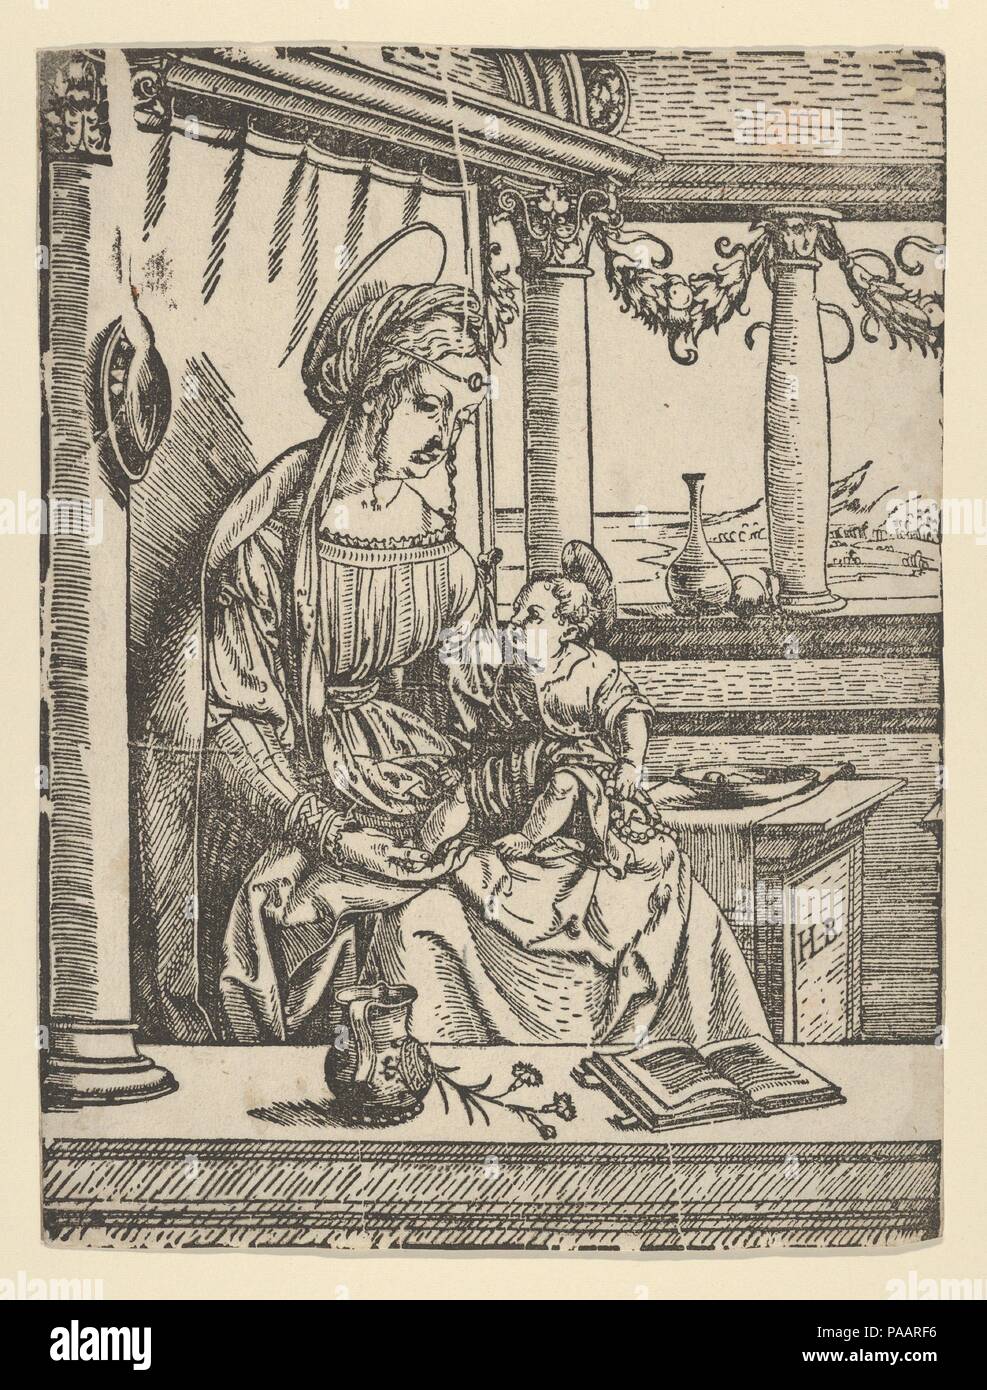 The Virgin Seated with the Child. Artist: Hans Burgkmair (German, Augsburg 1473-1531 Augsburg). Dimensions: Sheet: 9 1/4 × 7 in. (23.5 × 17.8 cm). Museum: Metropolitan Museum of Art, New York, USA. Stock Photo